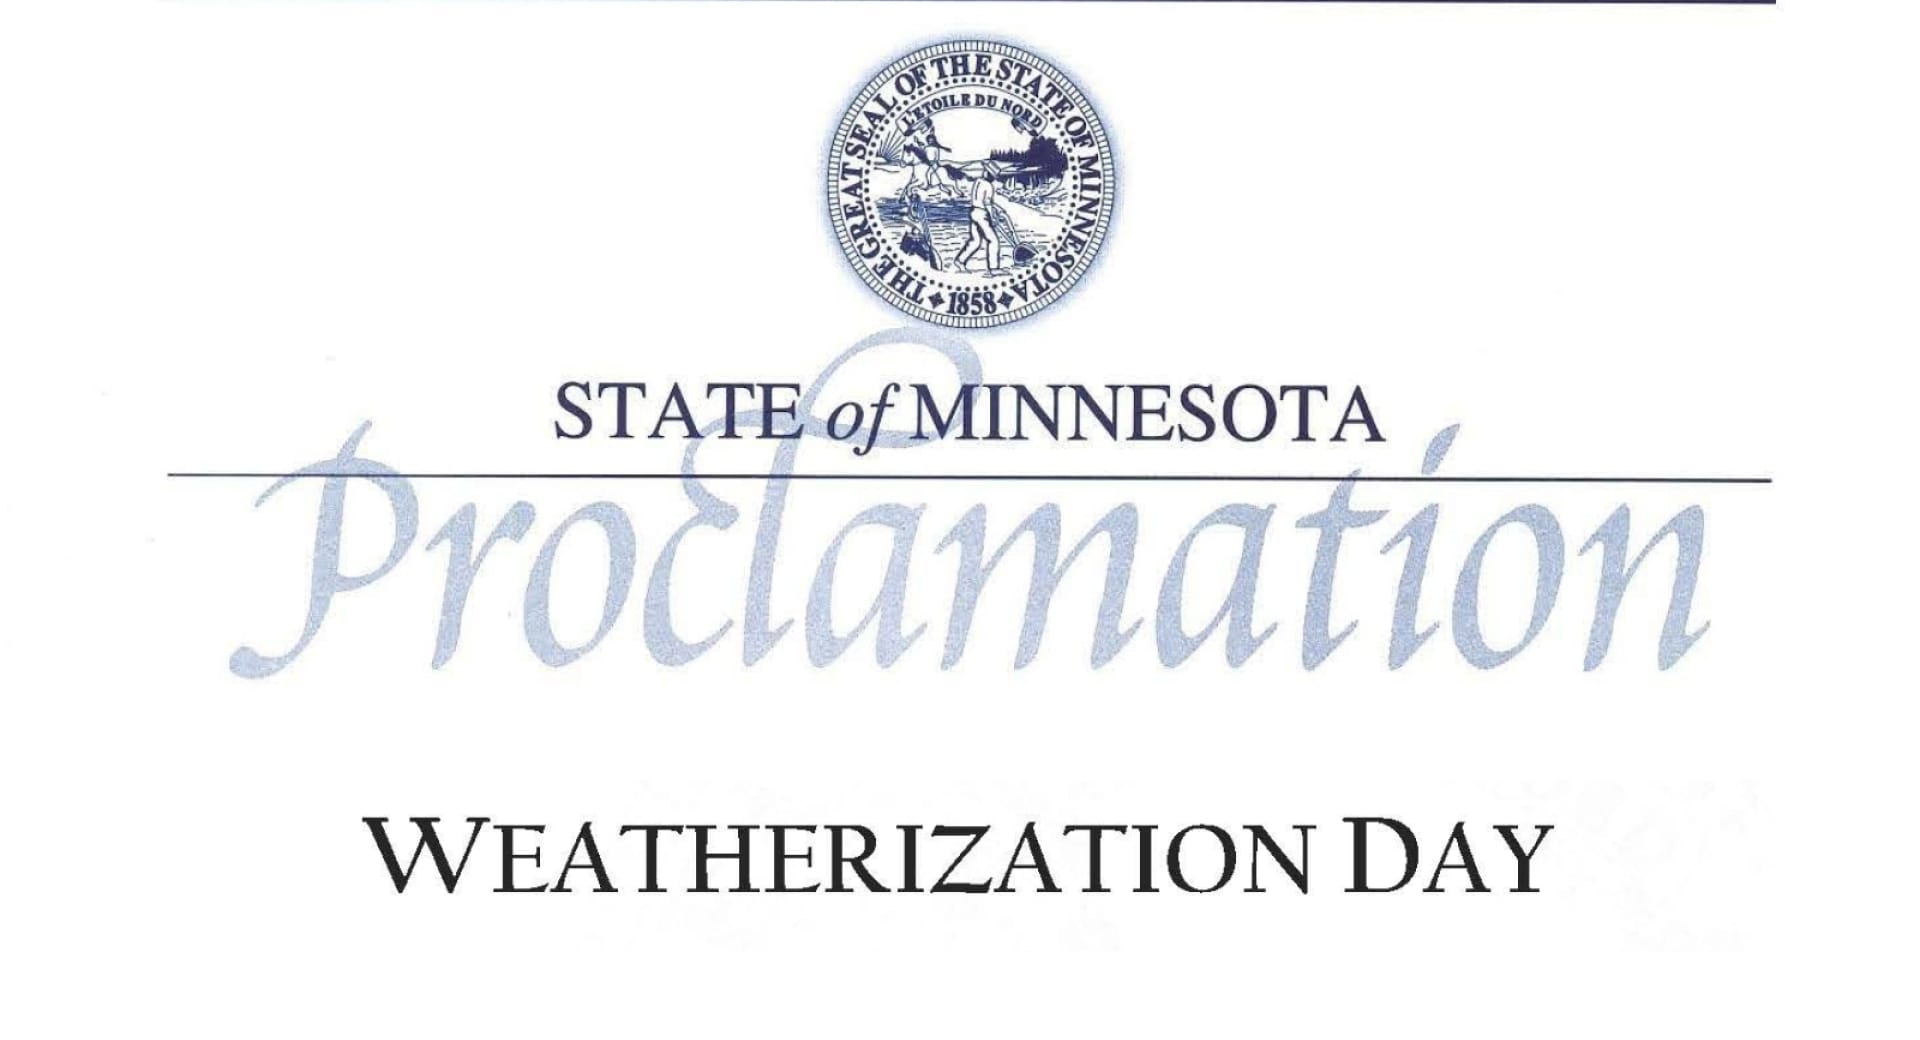 Gov. Walz proclaims Oct. 30th annual Weatherization Day; celebrating 45 years of making homes more energy efficient